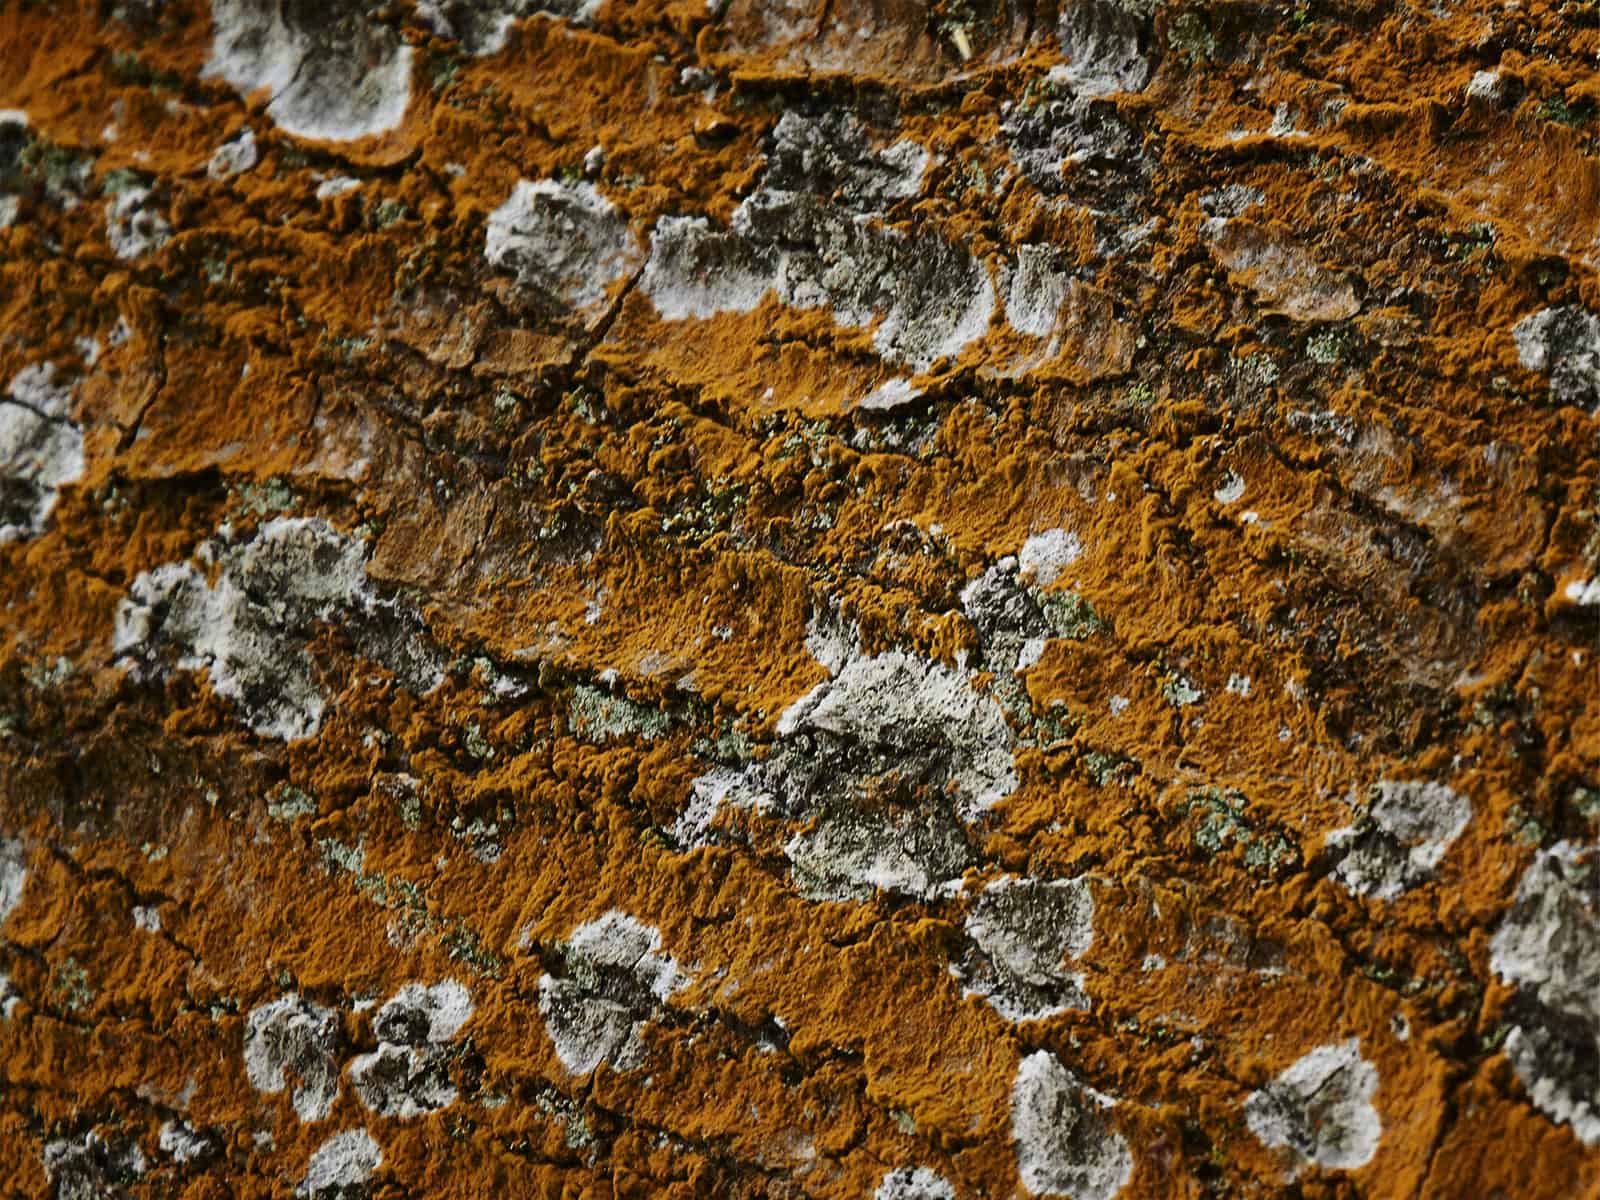 Image description: This is a landscape image and a close up macro shot of a pattern on a tree branch. We can see lichen and mould growing on the tree and this has taken over, and takes over the whole image to create the pattern. The lichen pattern i…